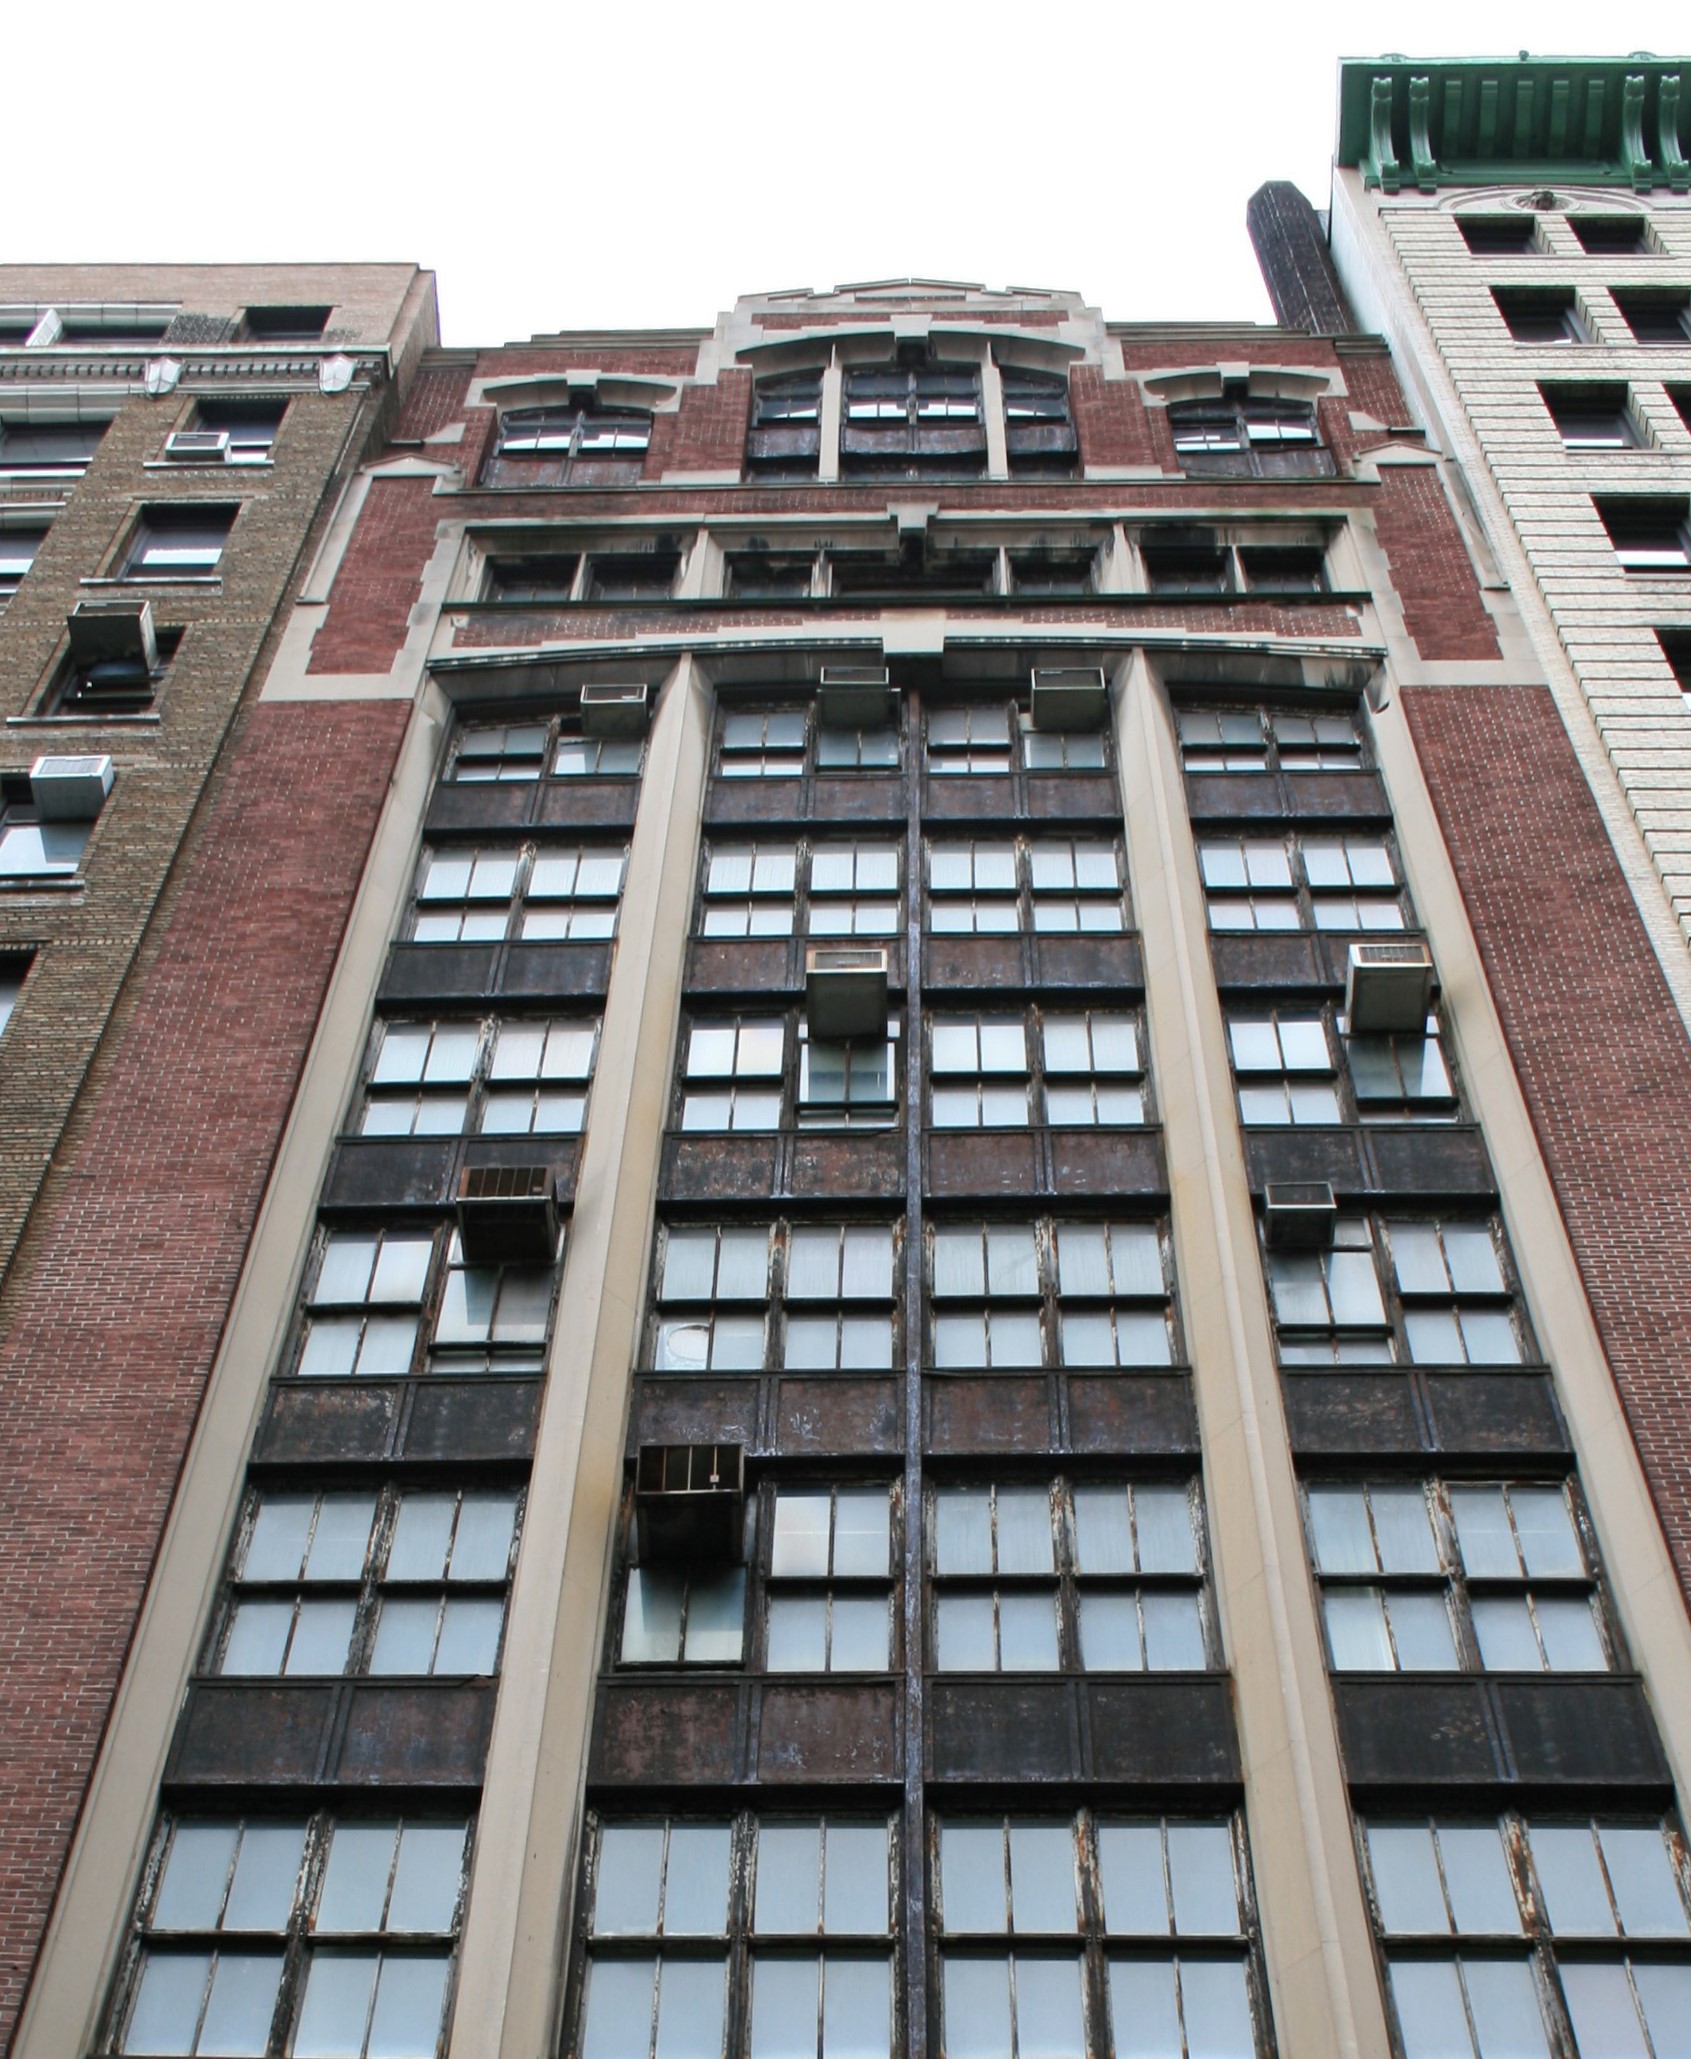 Facade of 114 East 25th Street before the building renovation